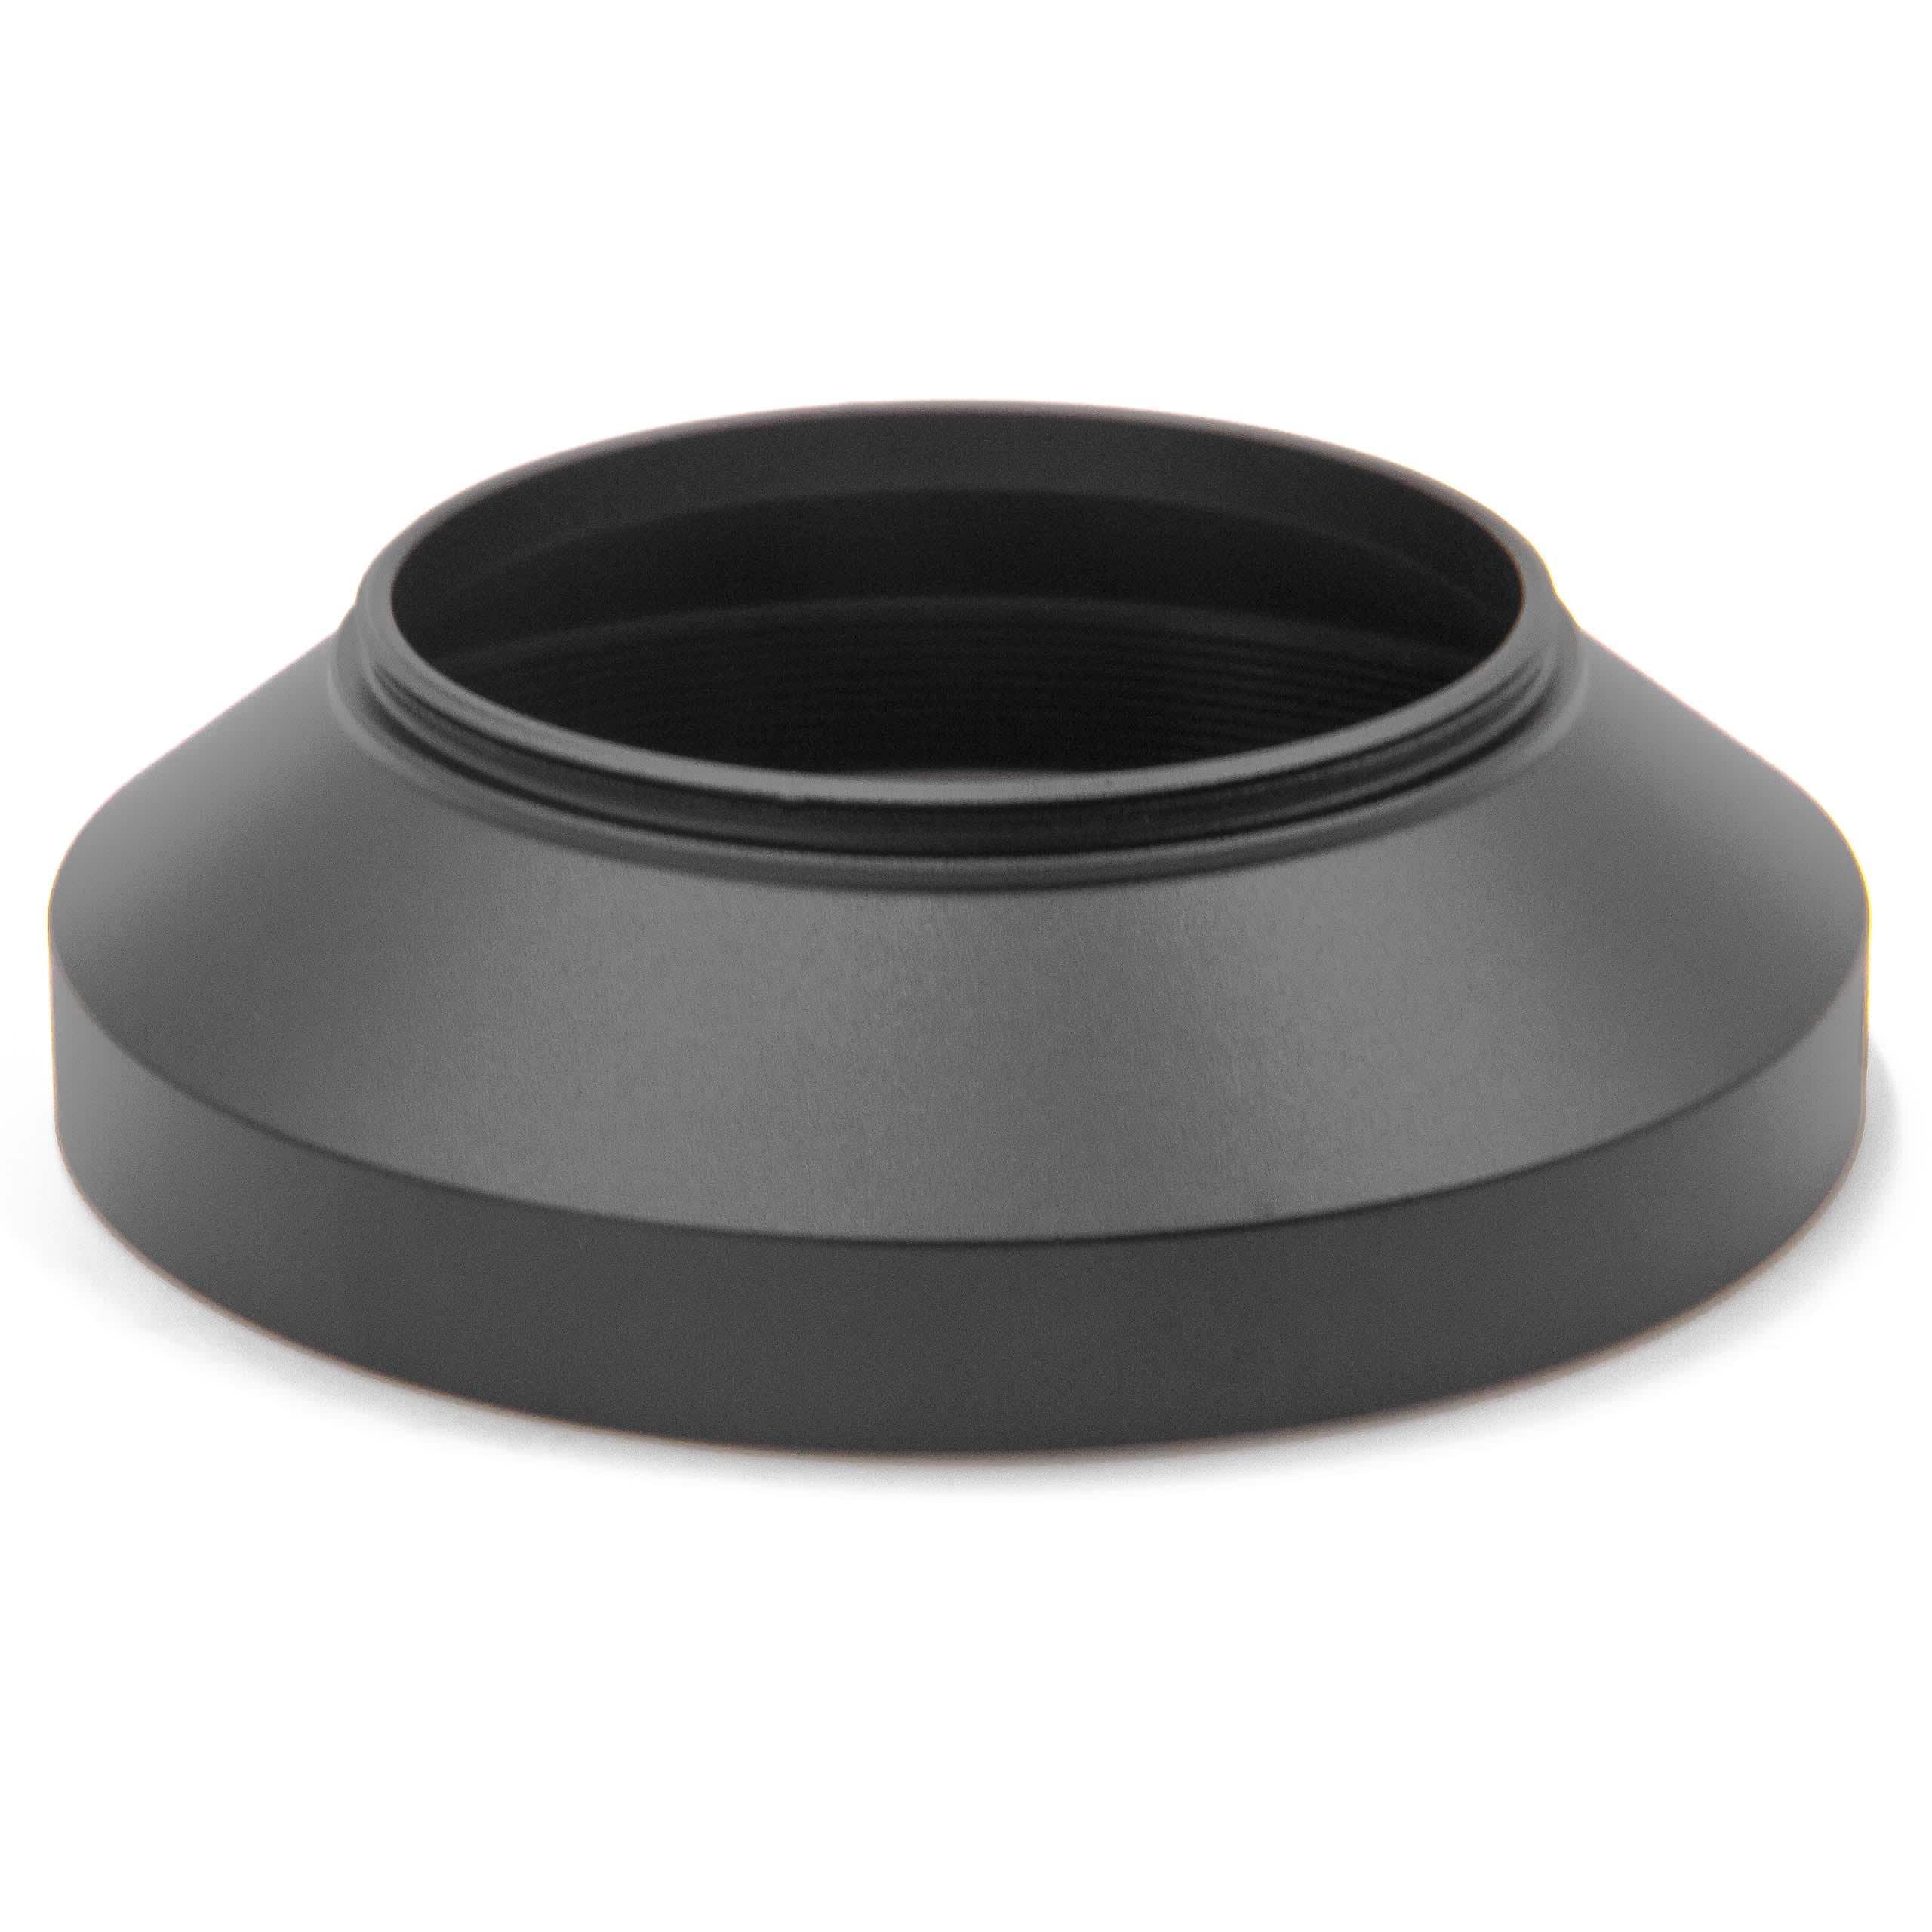 Lens Hood suitable for 49mm Lens - Wide-Angle Lens Shade Black, Round